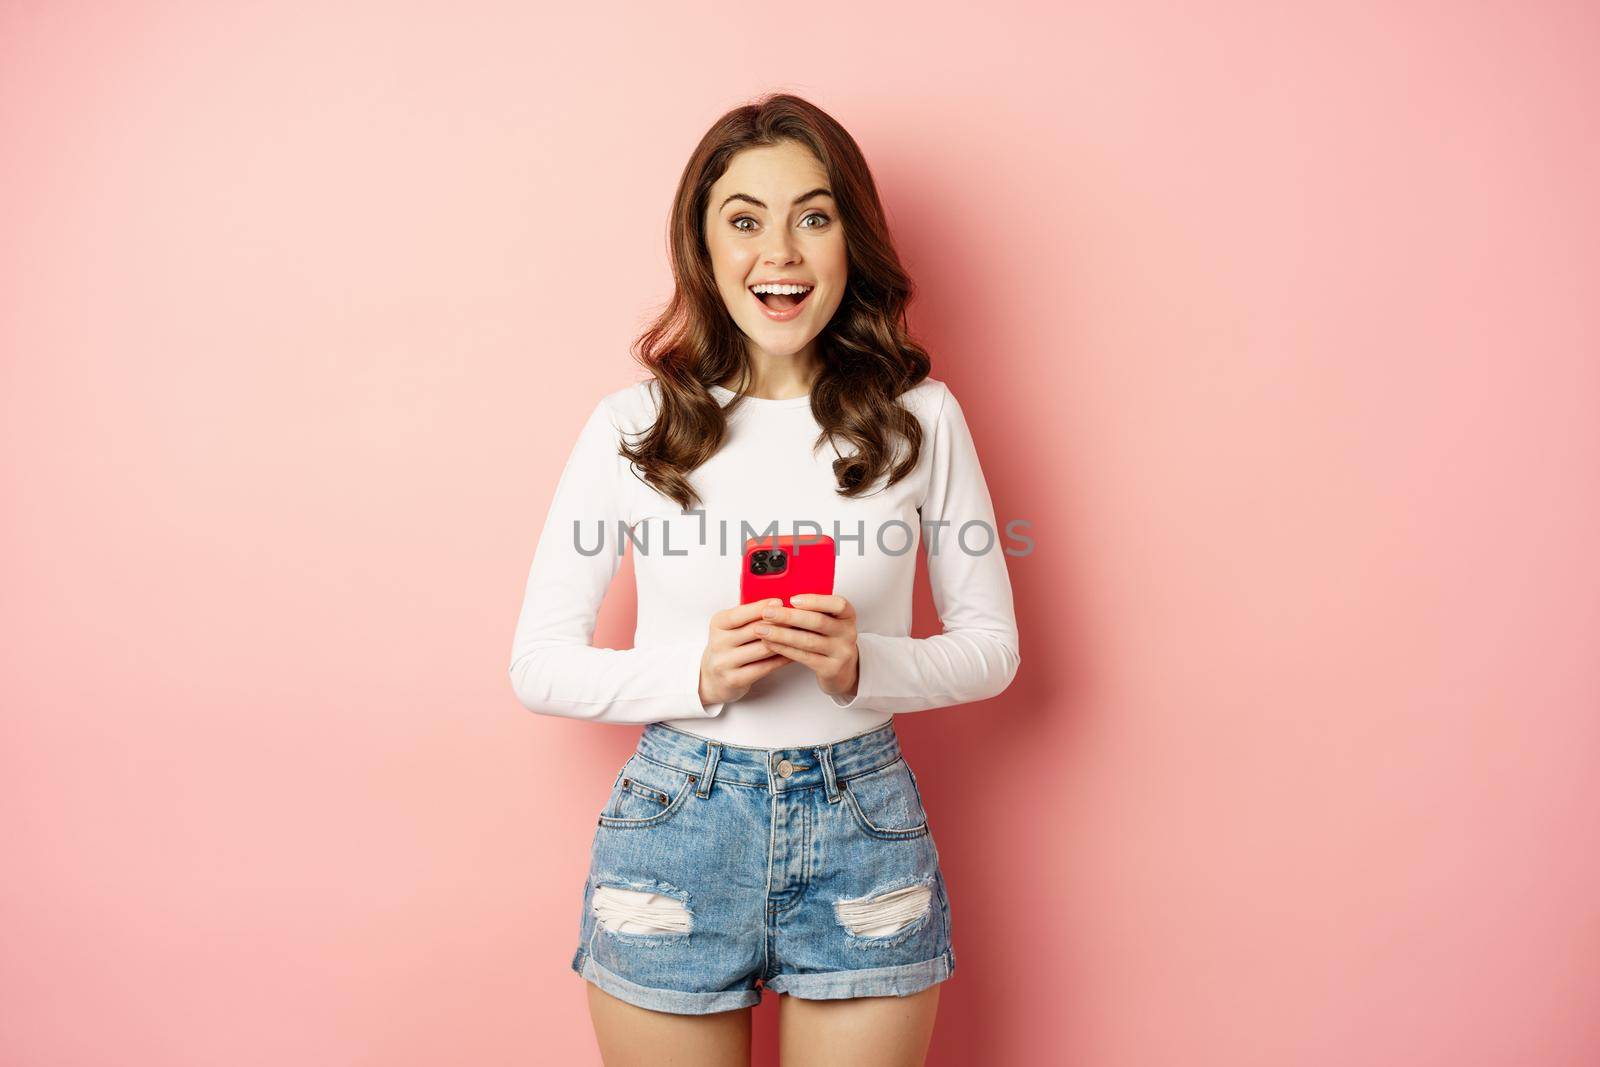 Online shopping and cellphone concept. Excited attractive girl holding mobile phone and smiling, standing over pink background.